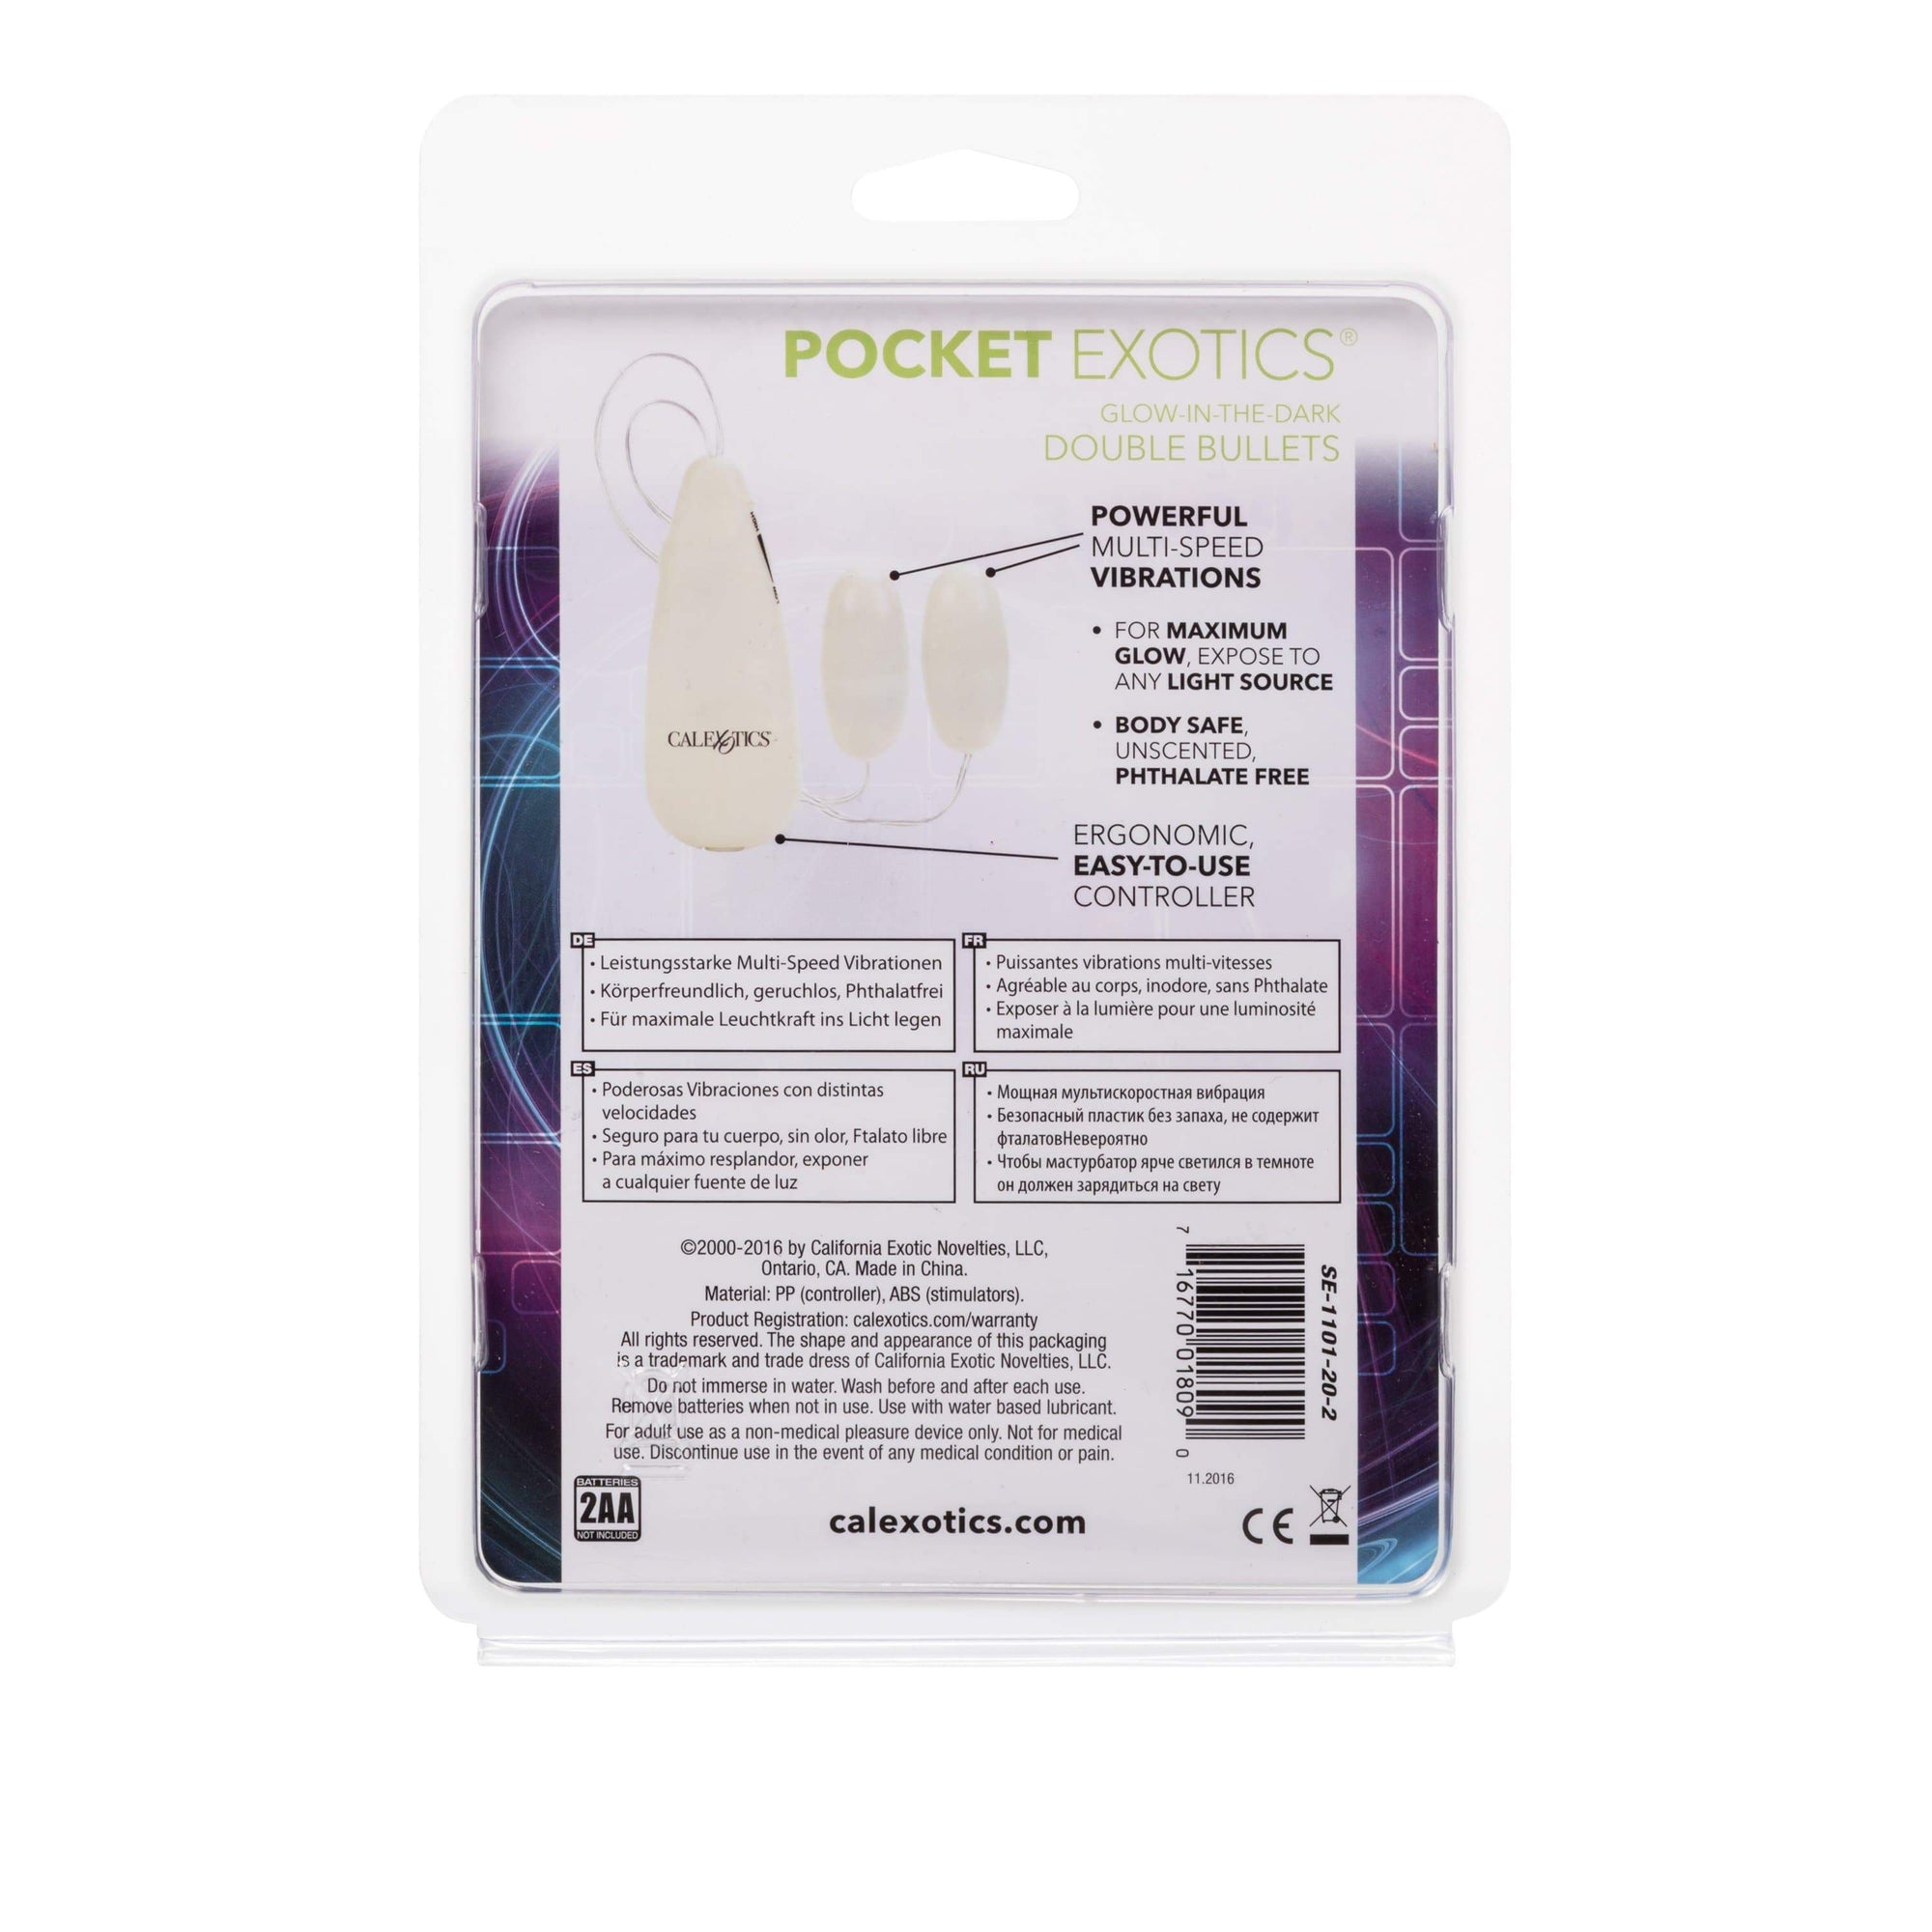 California Exotics - Pocket Exotics Glow In The Dark Double Bullets Vibrator (Green) Wired Remote Control Egg (Vibration) Non Rechargeable 716770018090 CherryAffairs